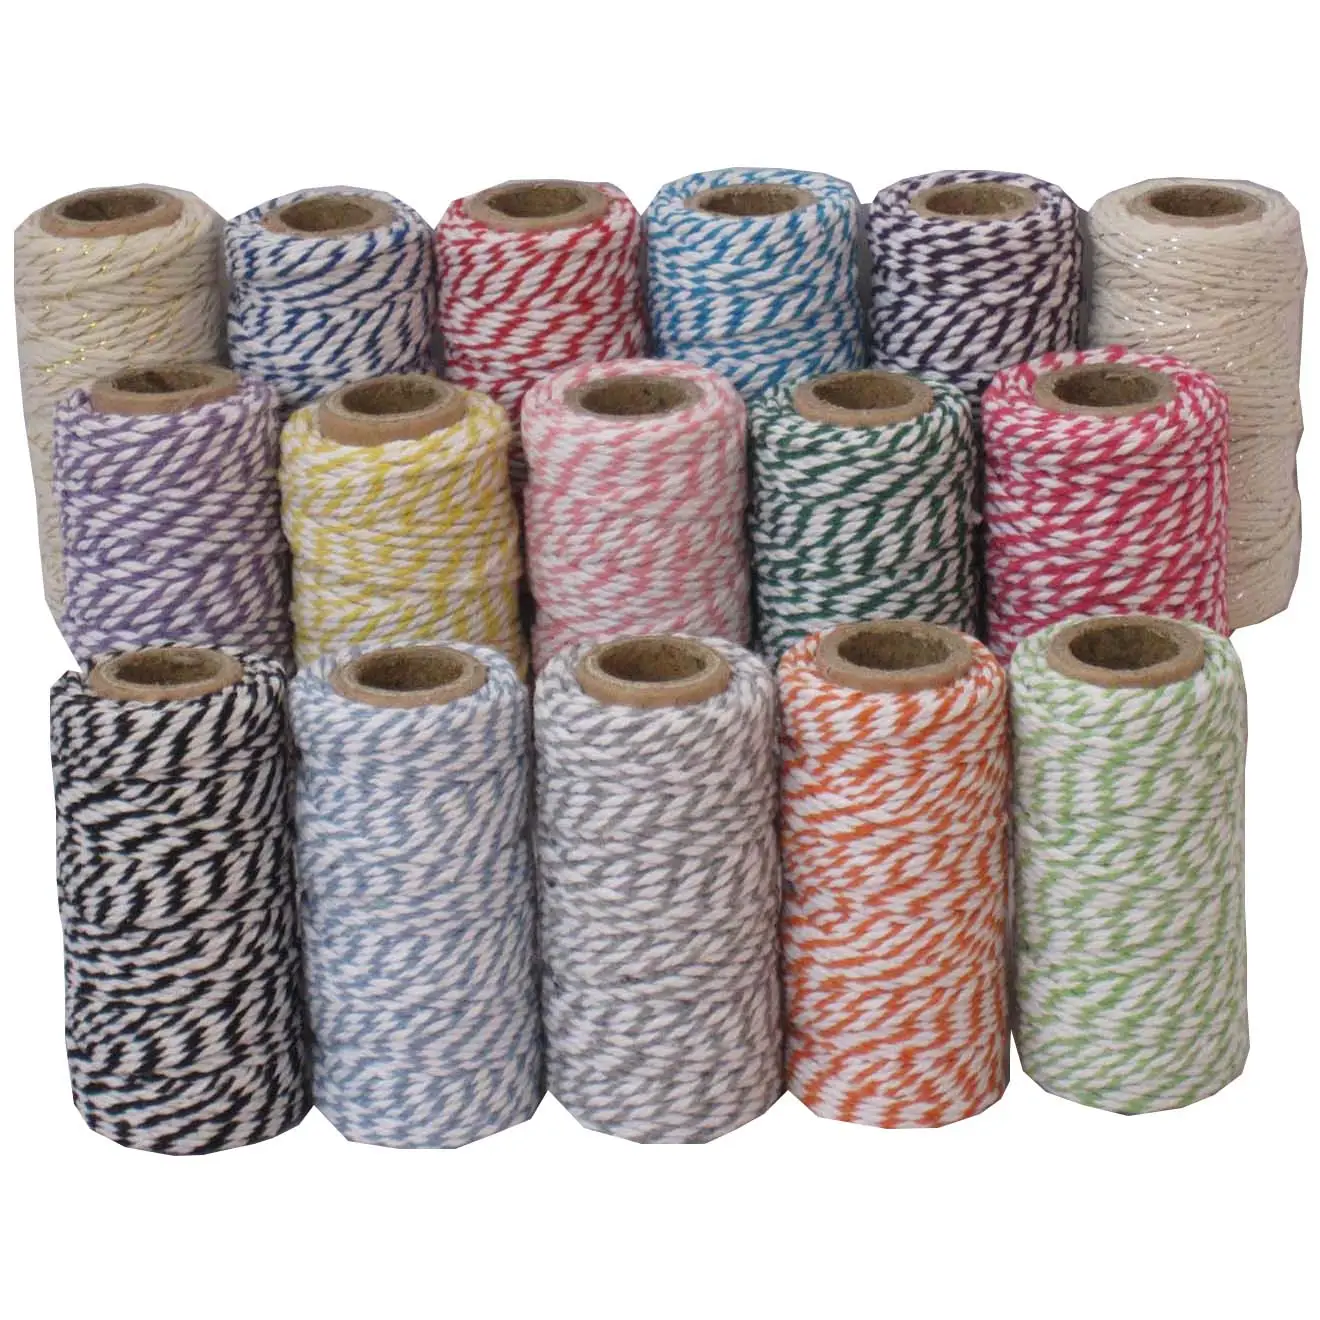 20m 2mm 12ply spool colored cotton twine, bakers twine for christmas gift wrapping